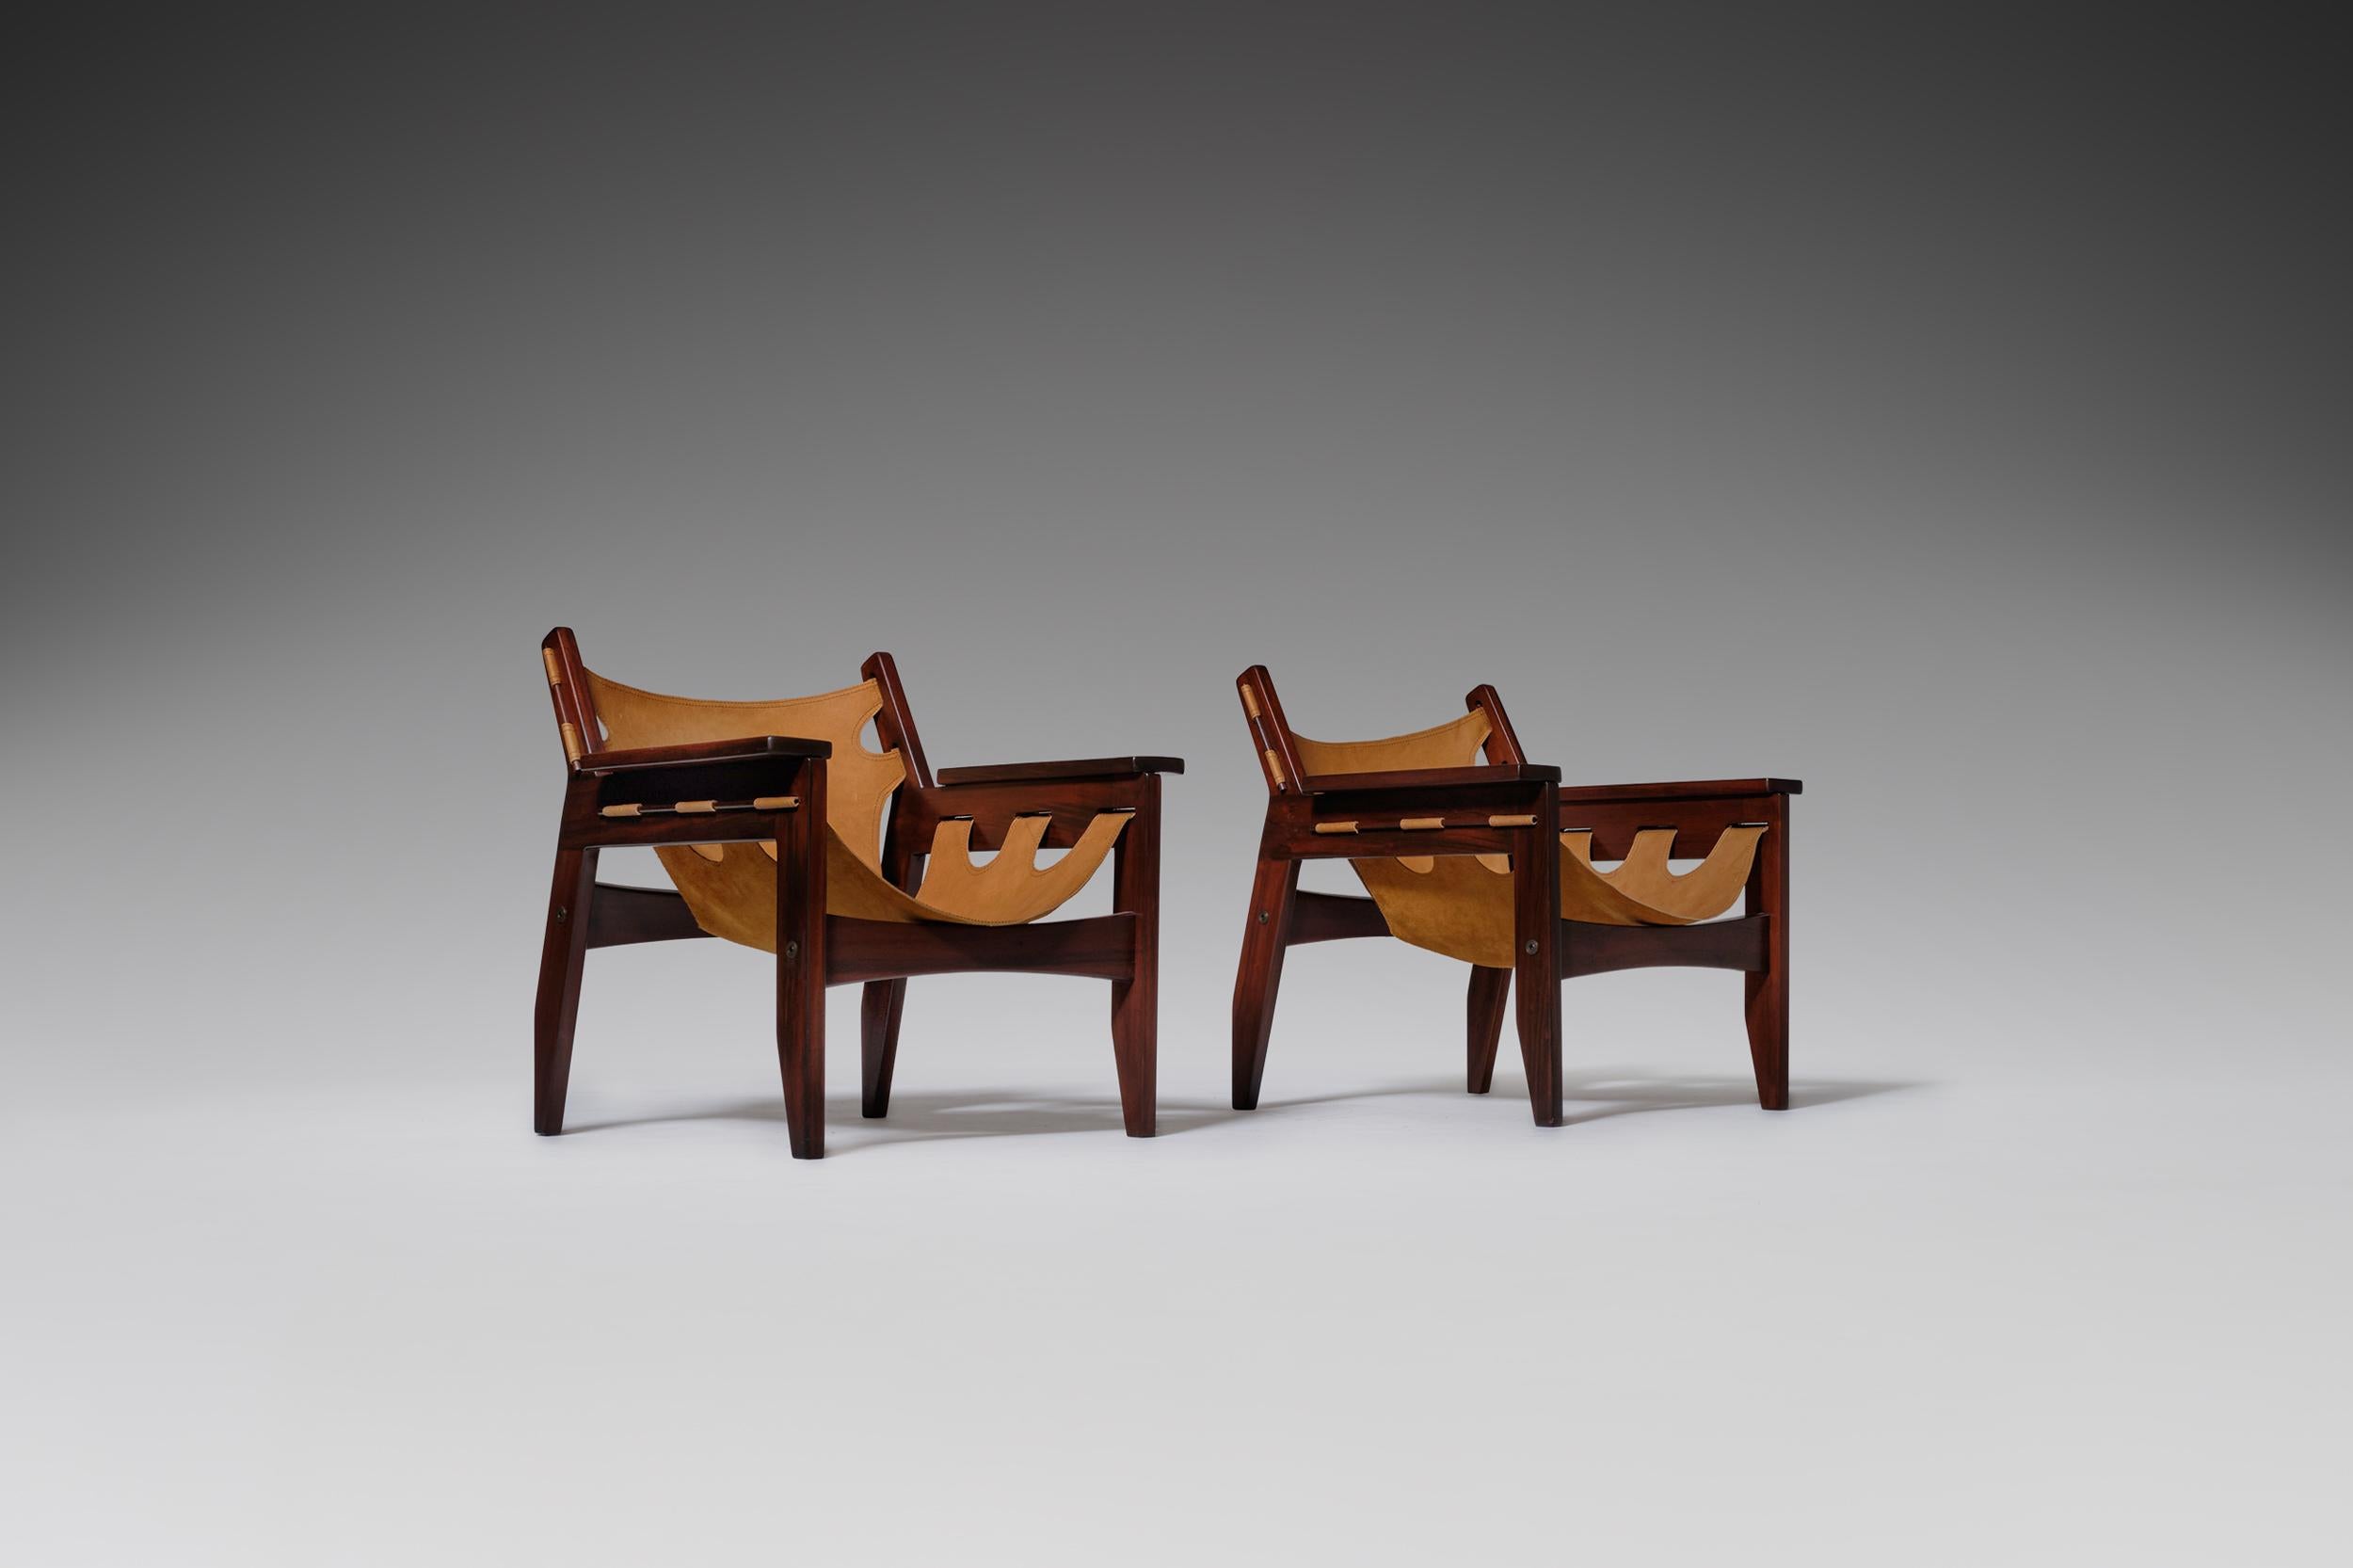 Beautiful pair of ‘Kilin’ lounge chairs by Sergio Rodrigues for Oca, Brazil, 1973. Distinctive design out of solid rosewood and natural ochre colored leather with a beautiful patina. Very elegant and comfortable armchairs in excellent condition.